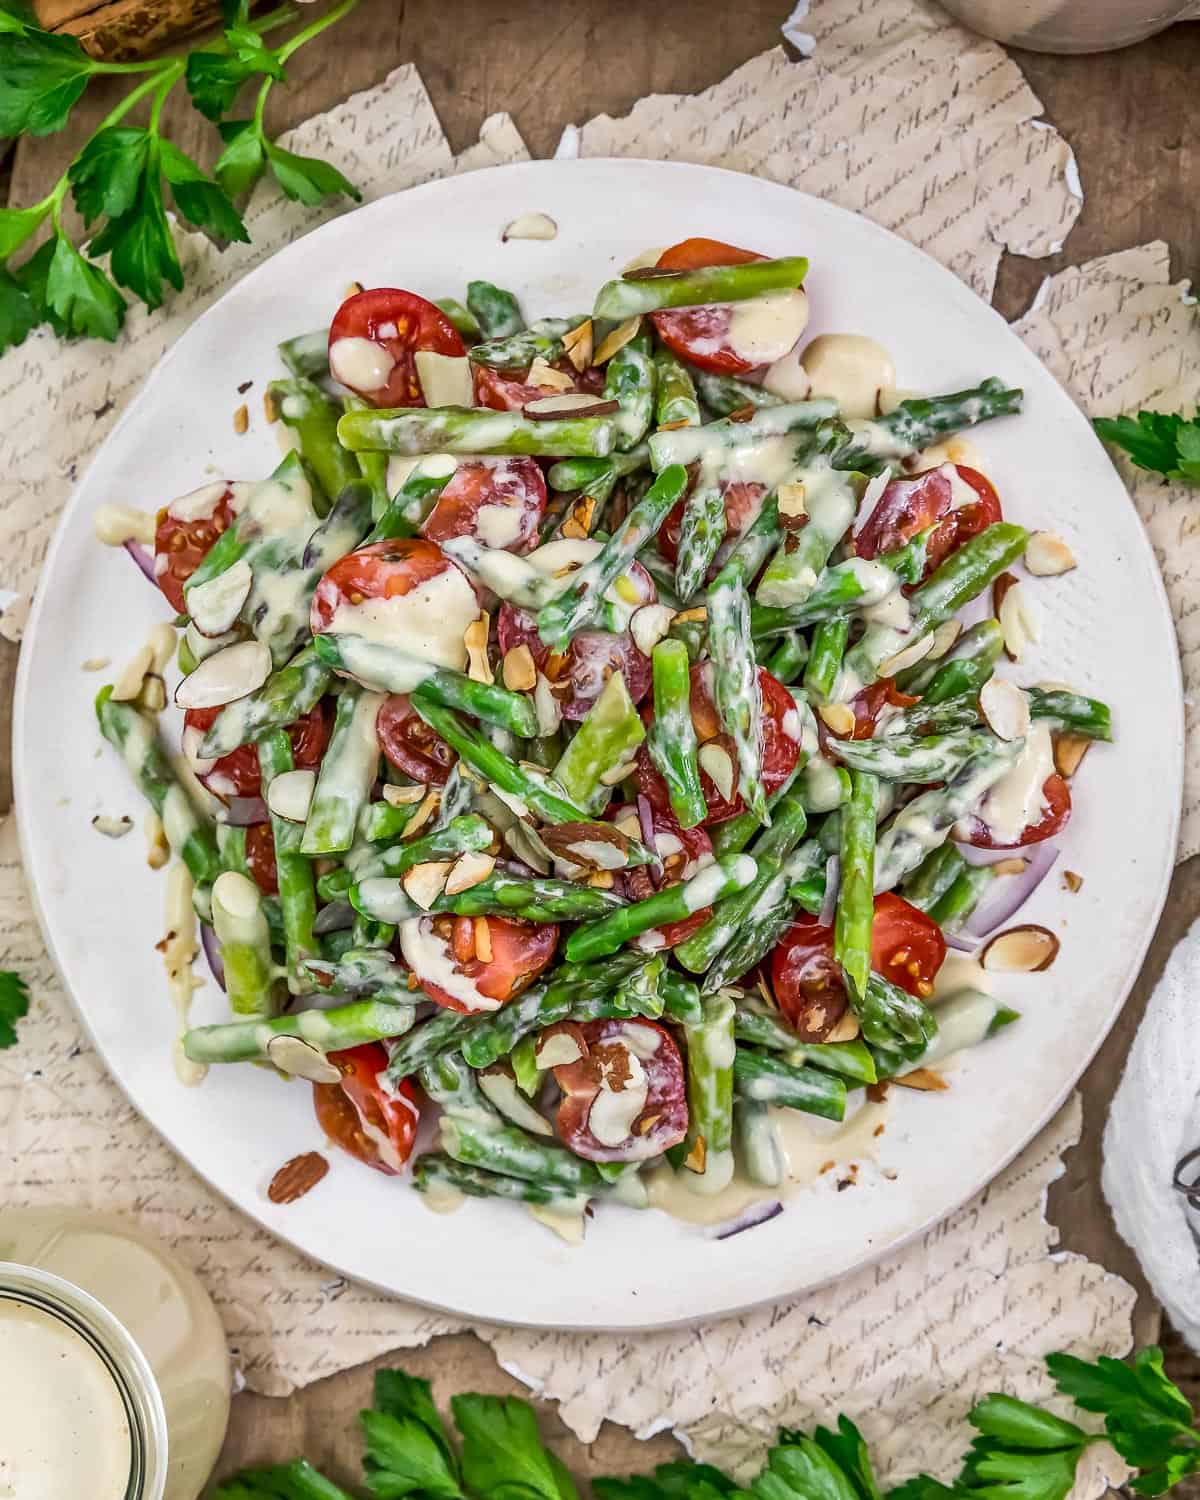 Plate of Asparagus Tomato Salad with Dijon Dressing